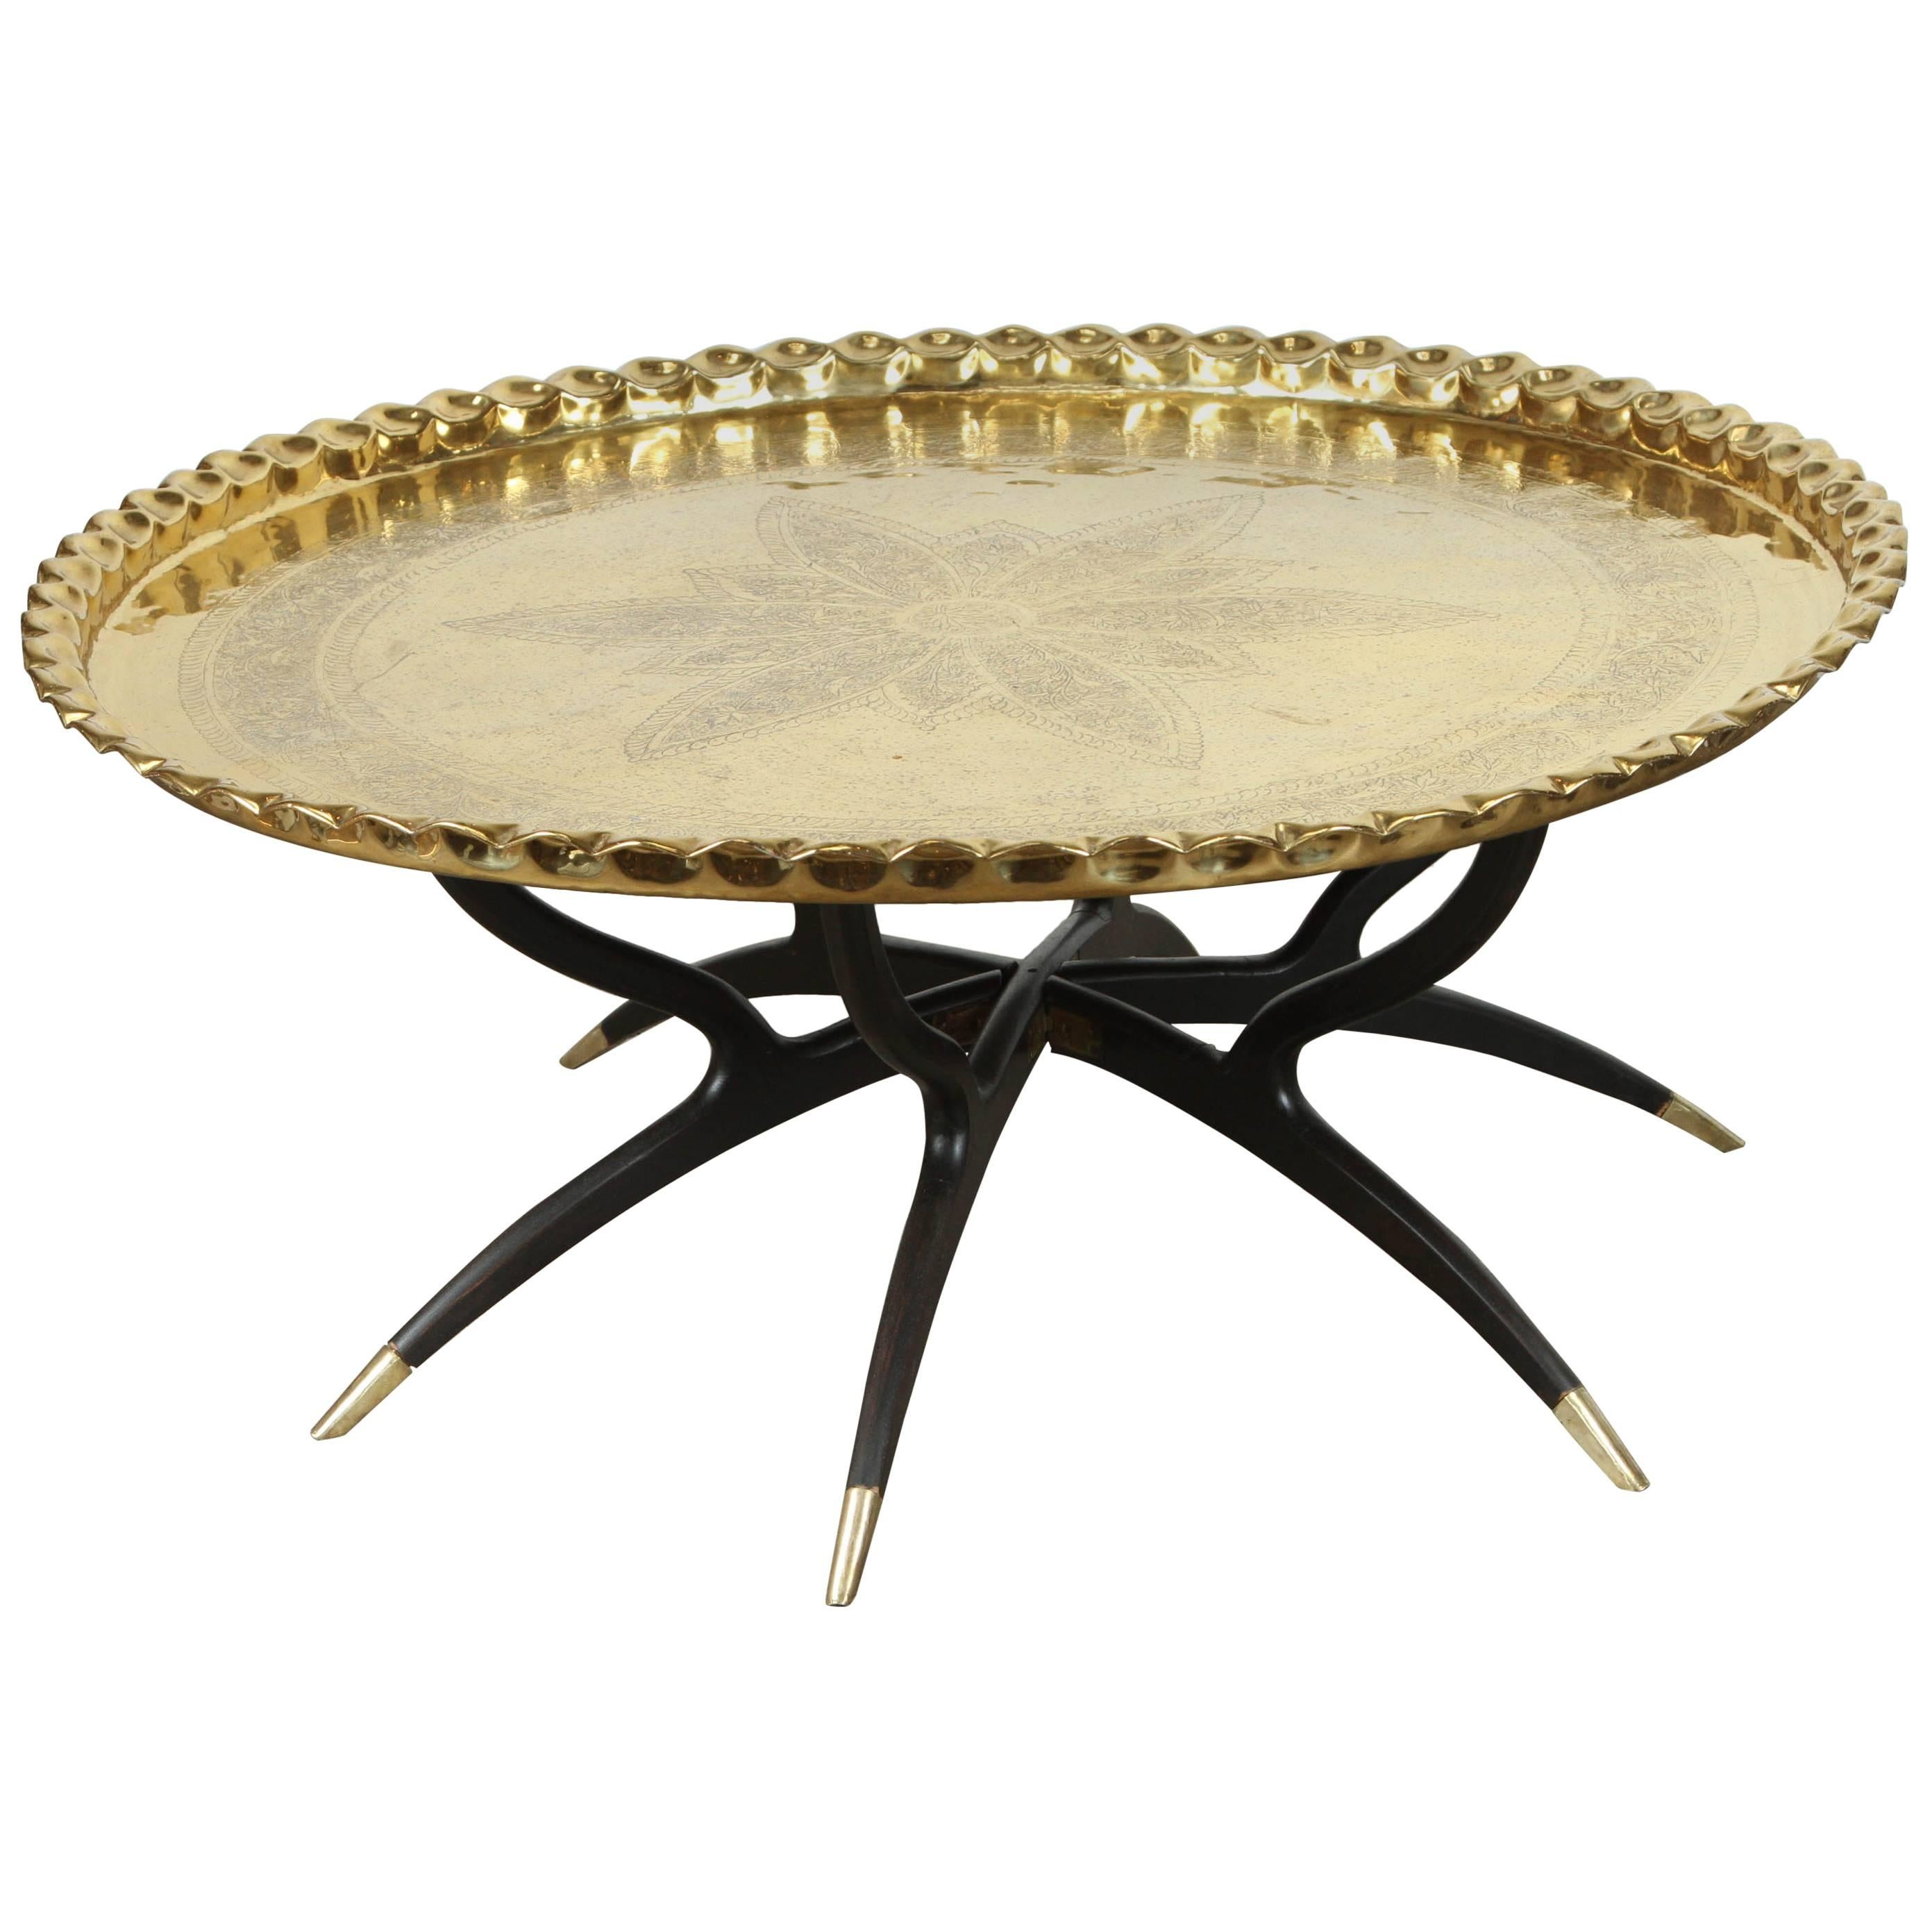 Large Polished Brass Tray Coffee Table on Spider-Leg